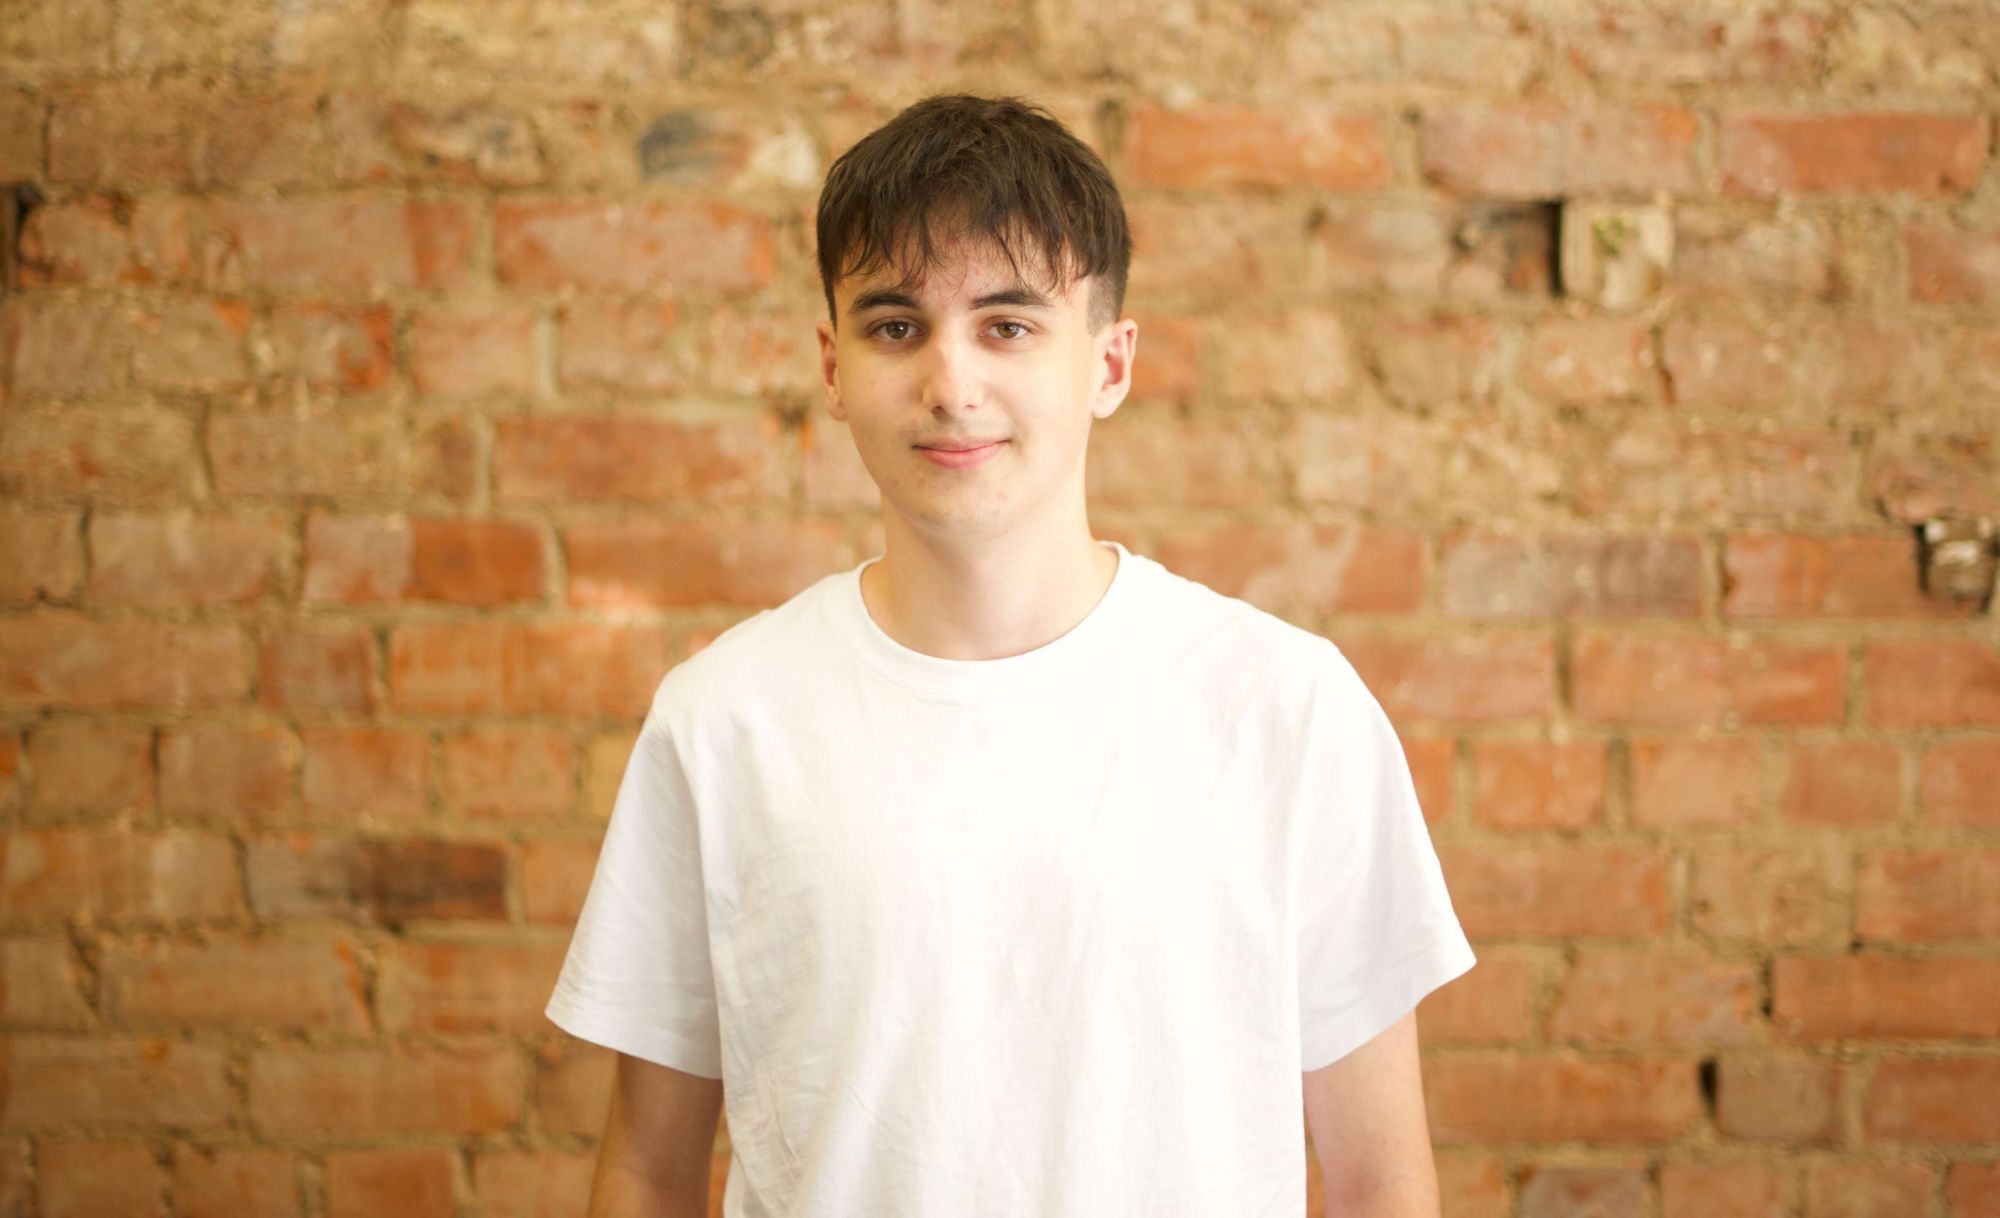 Where there's a Will — William Pells returns as RotaCloud's Apprentice Web Developer